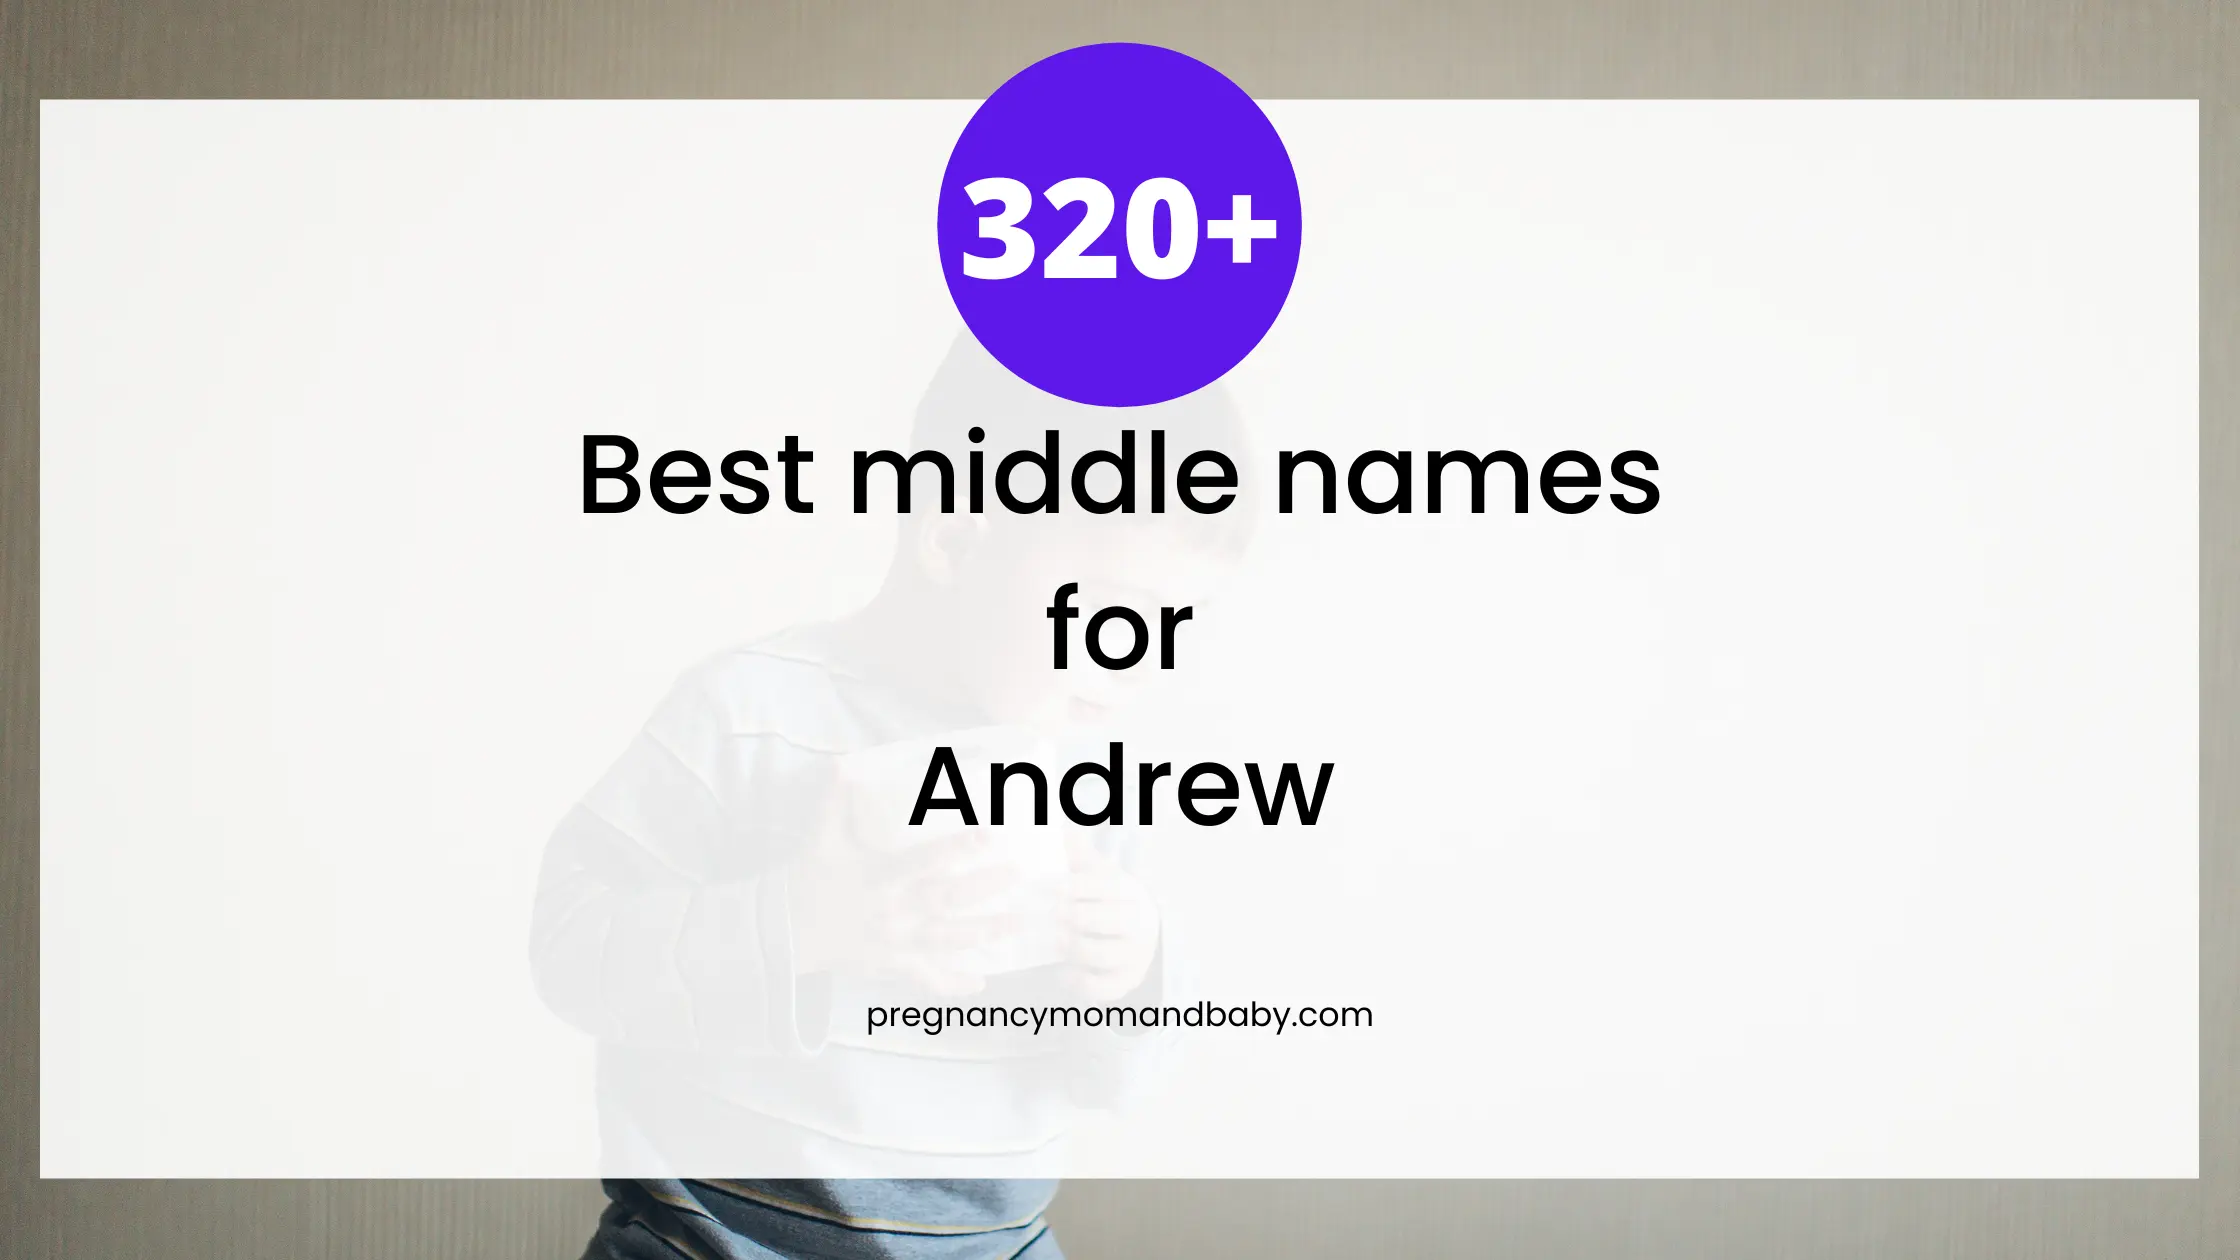 middle names for Andrew